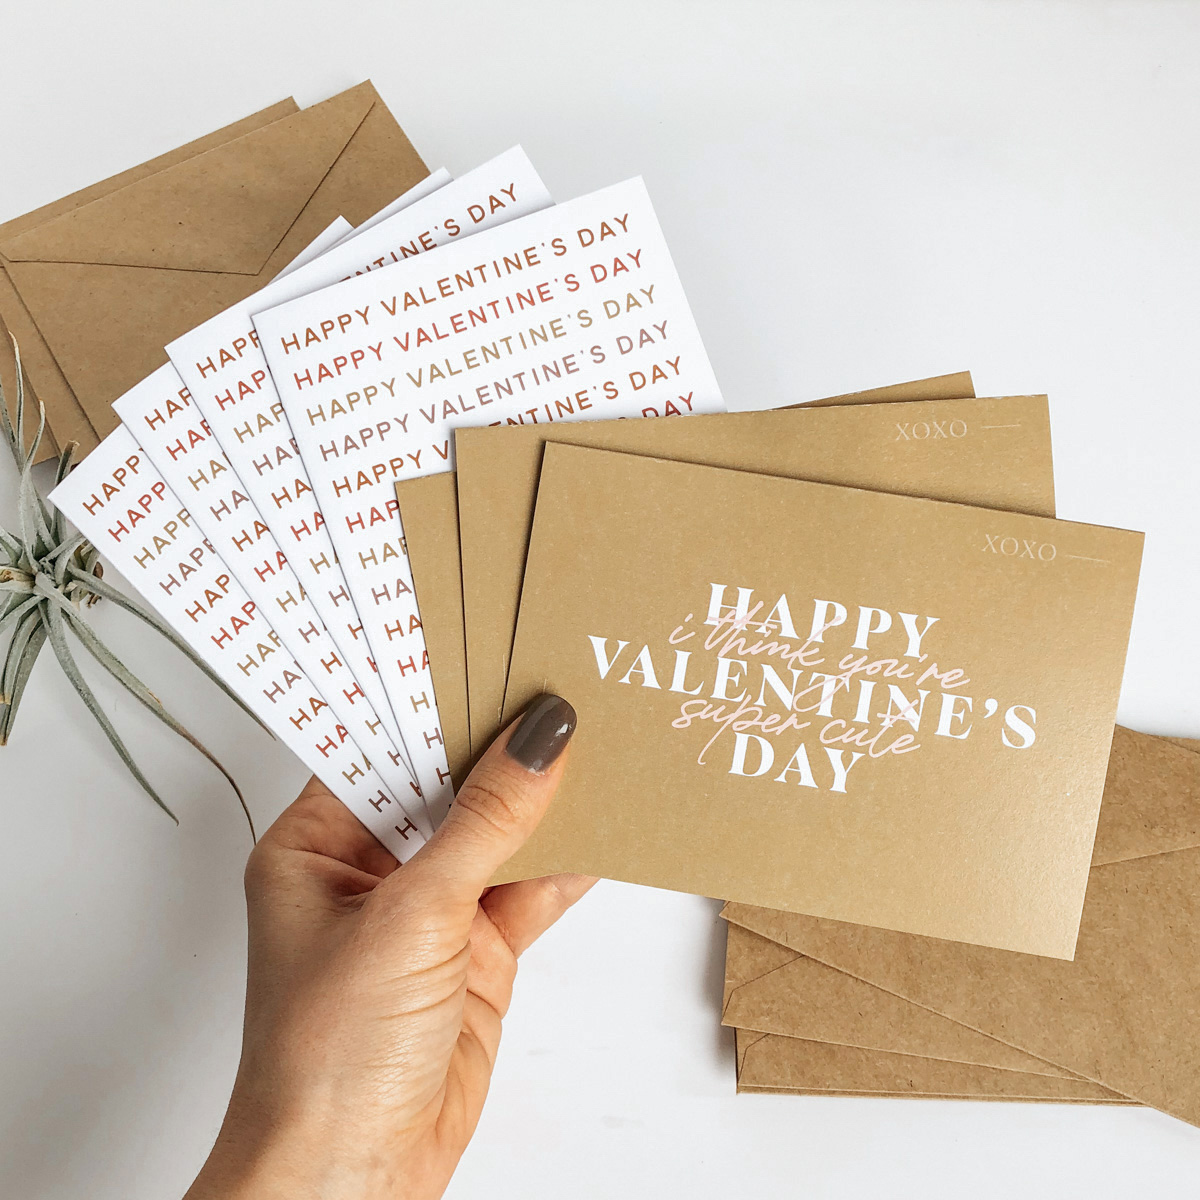 We've rounded up our best Valentine's Day Card ideas! Can't decide on just one? Be sure to check out our greeting card bundles!